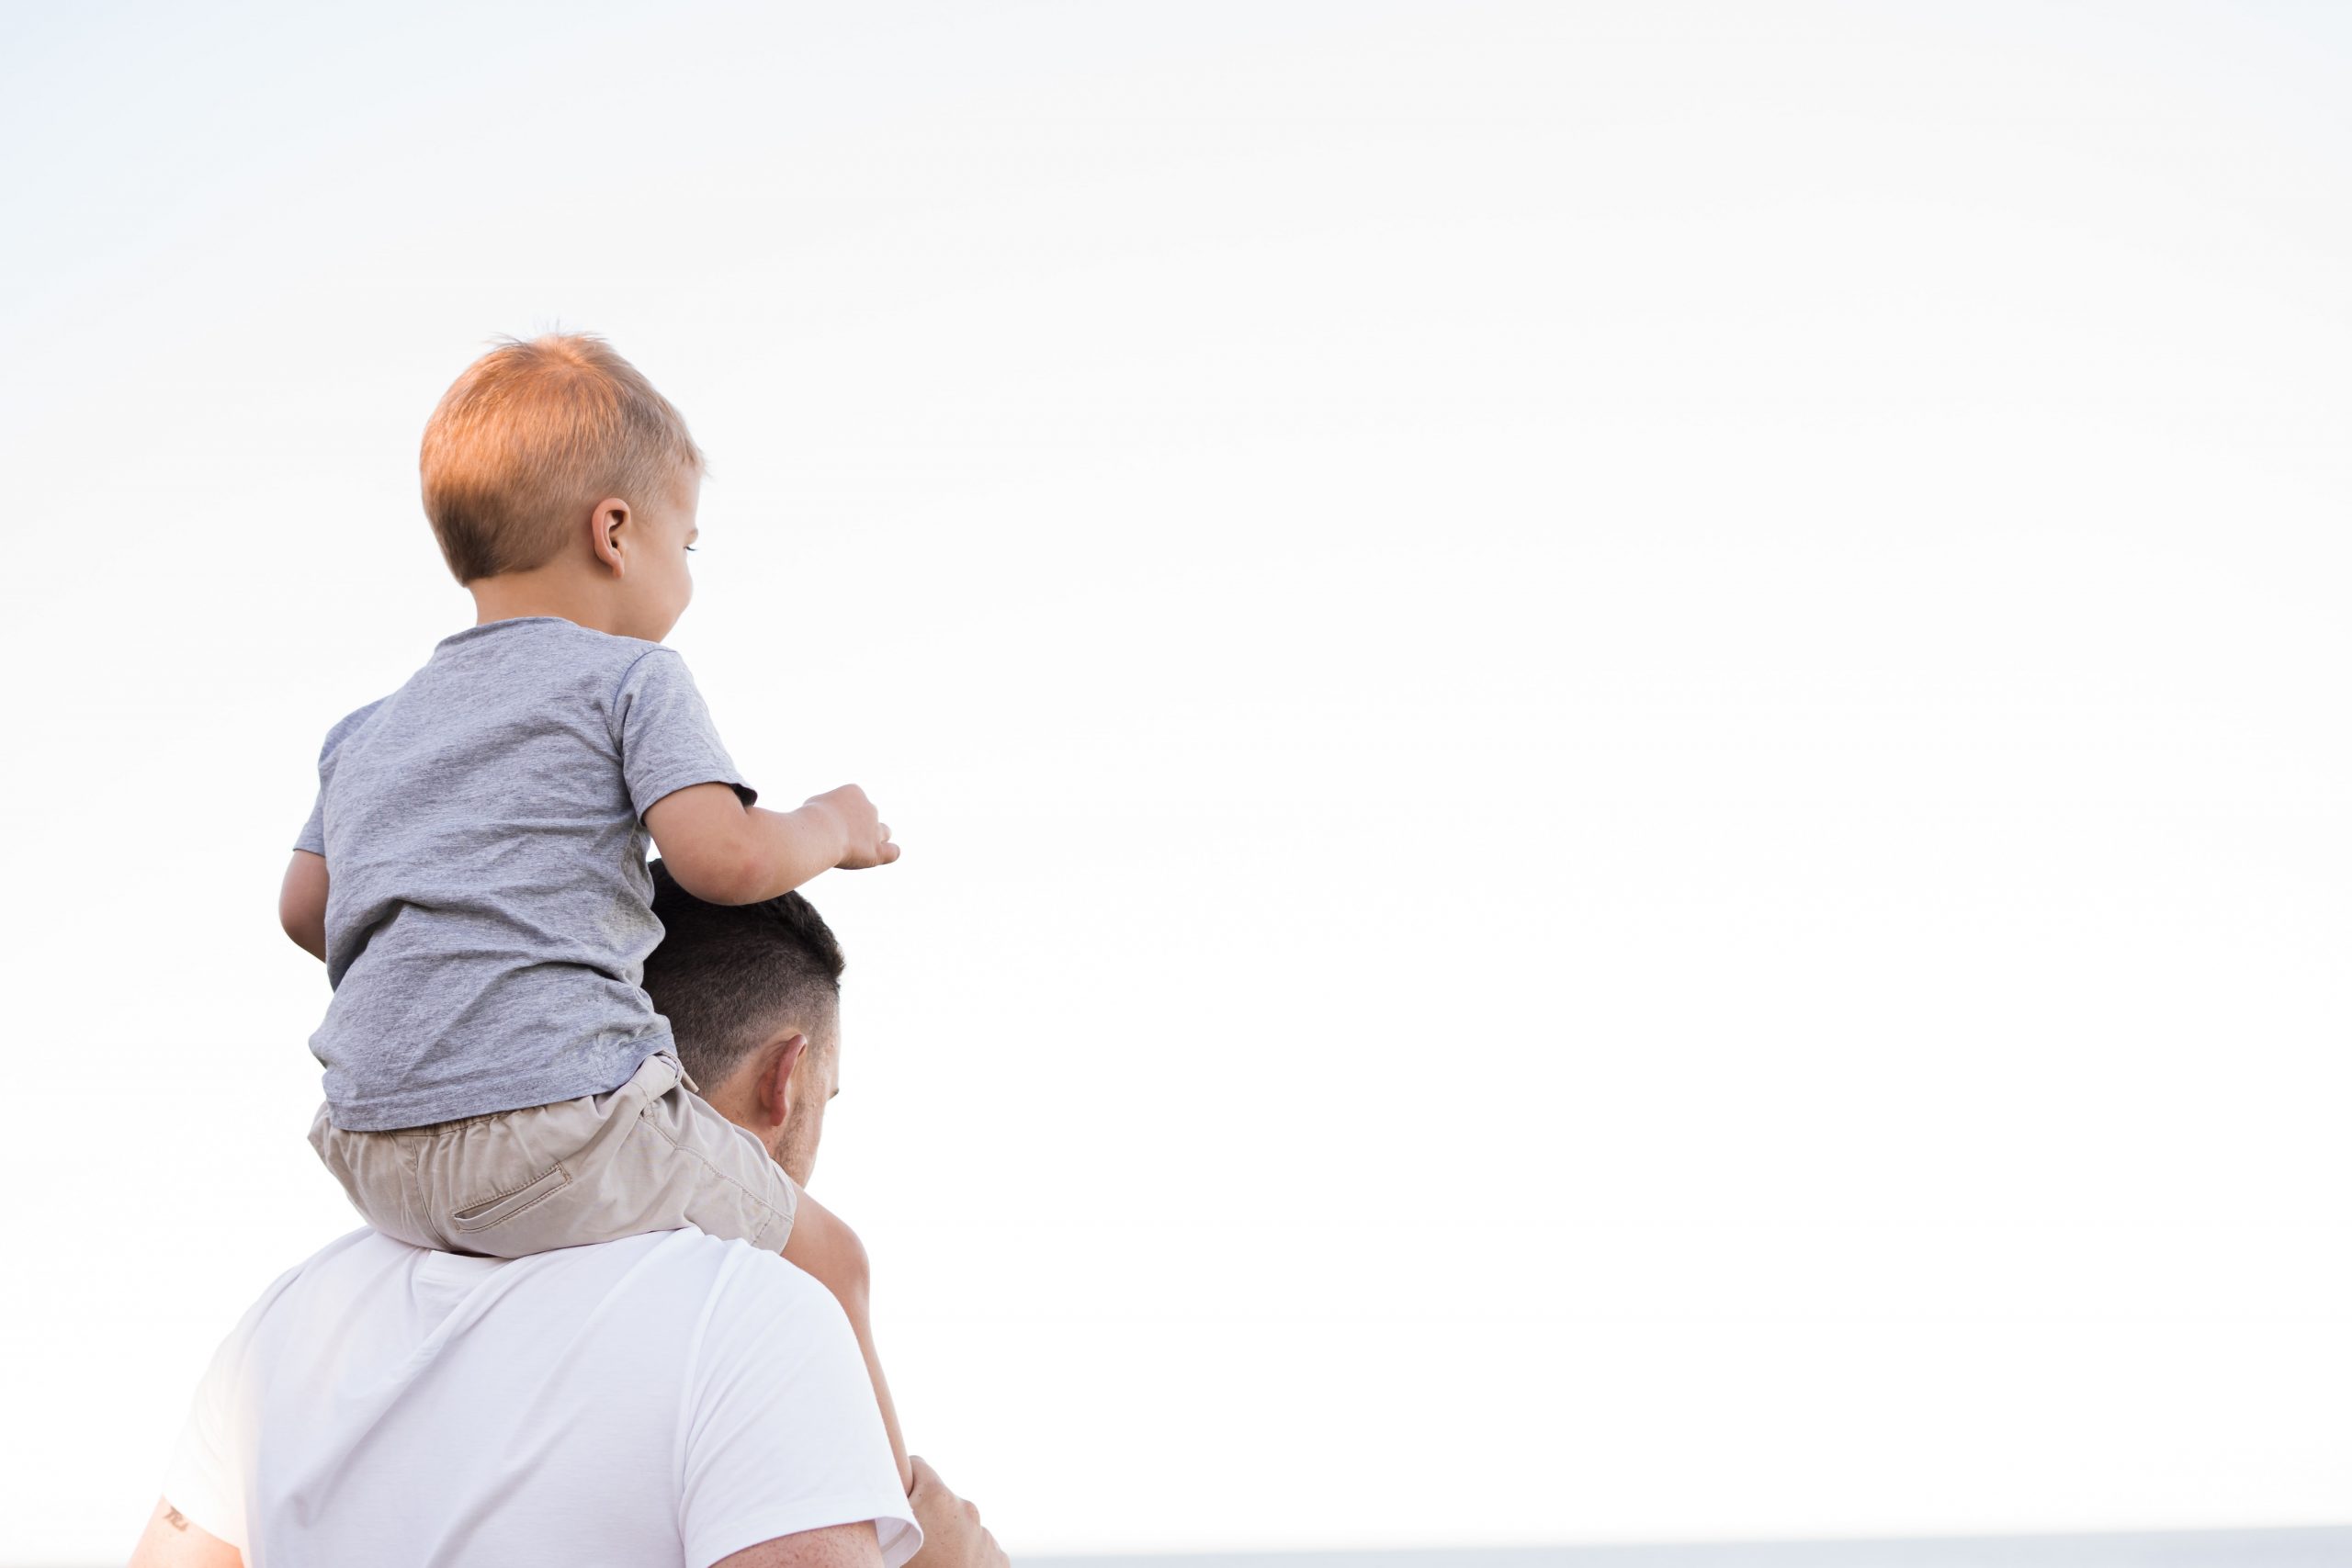 How does Child Custody Work? Family Lawyer Answers